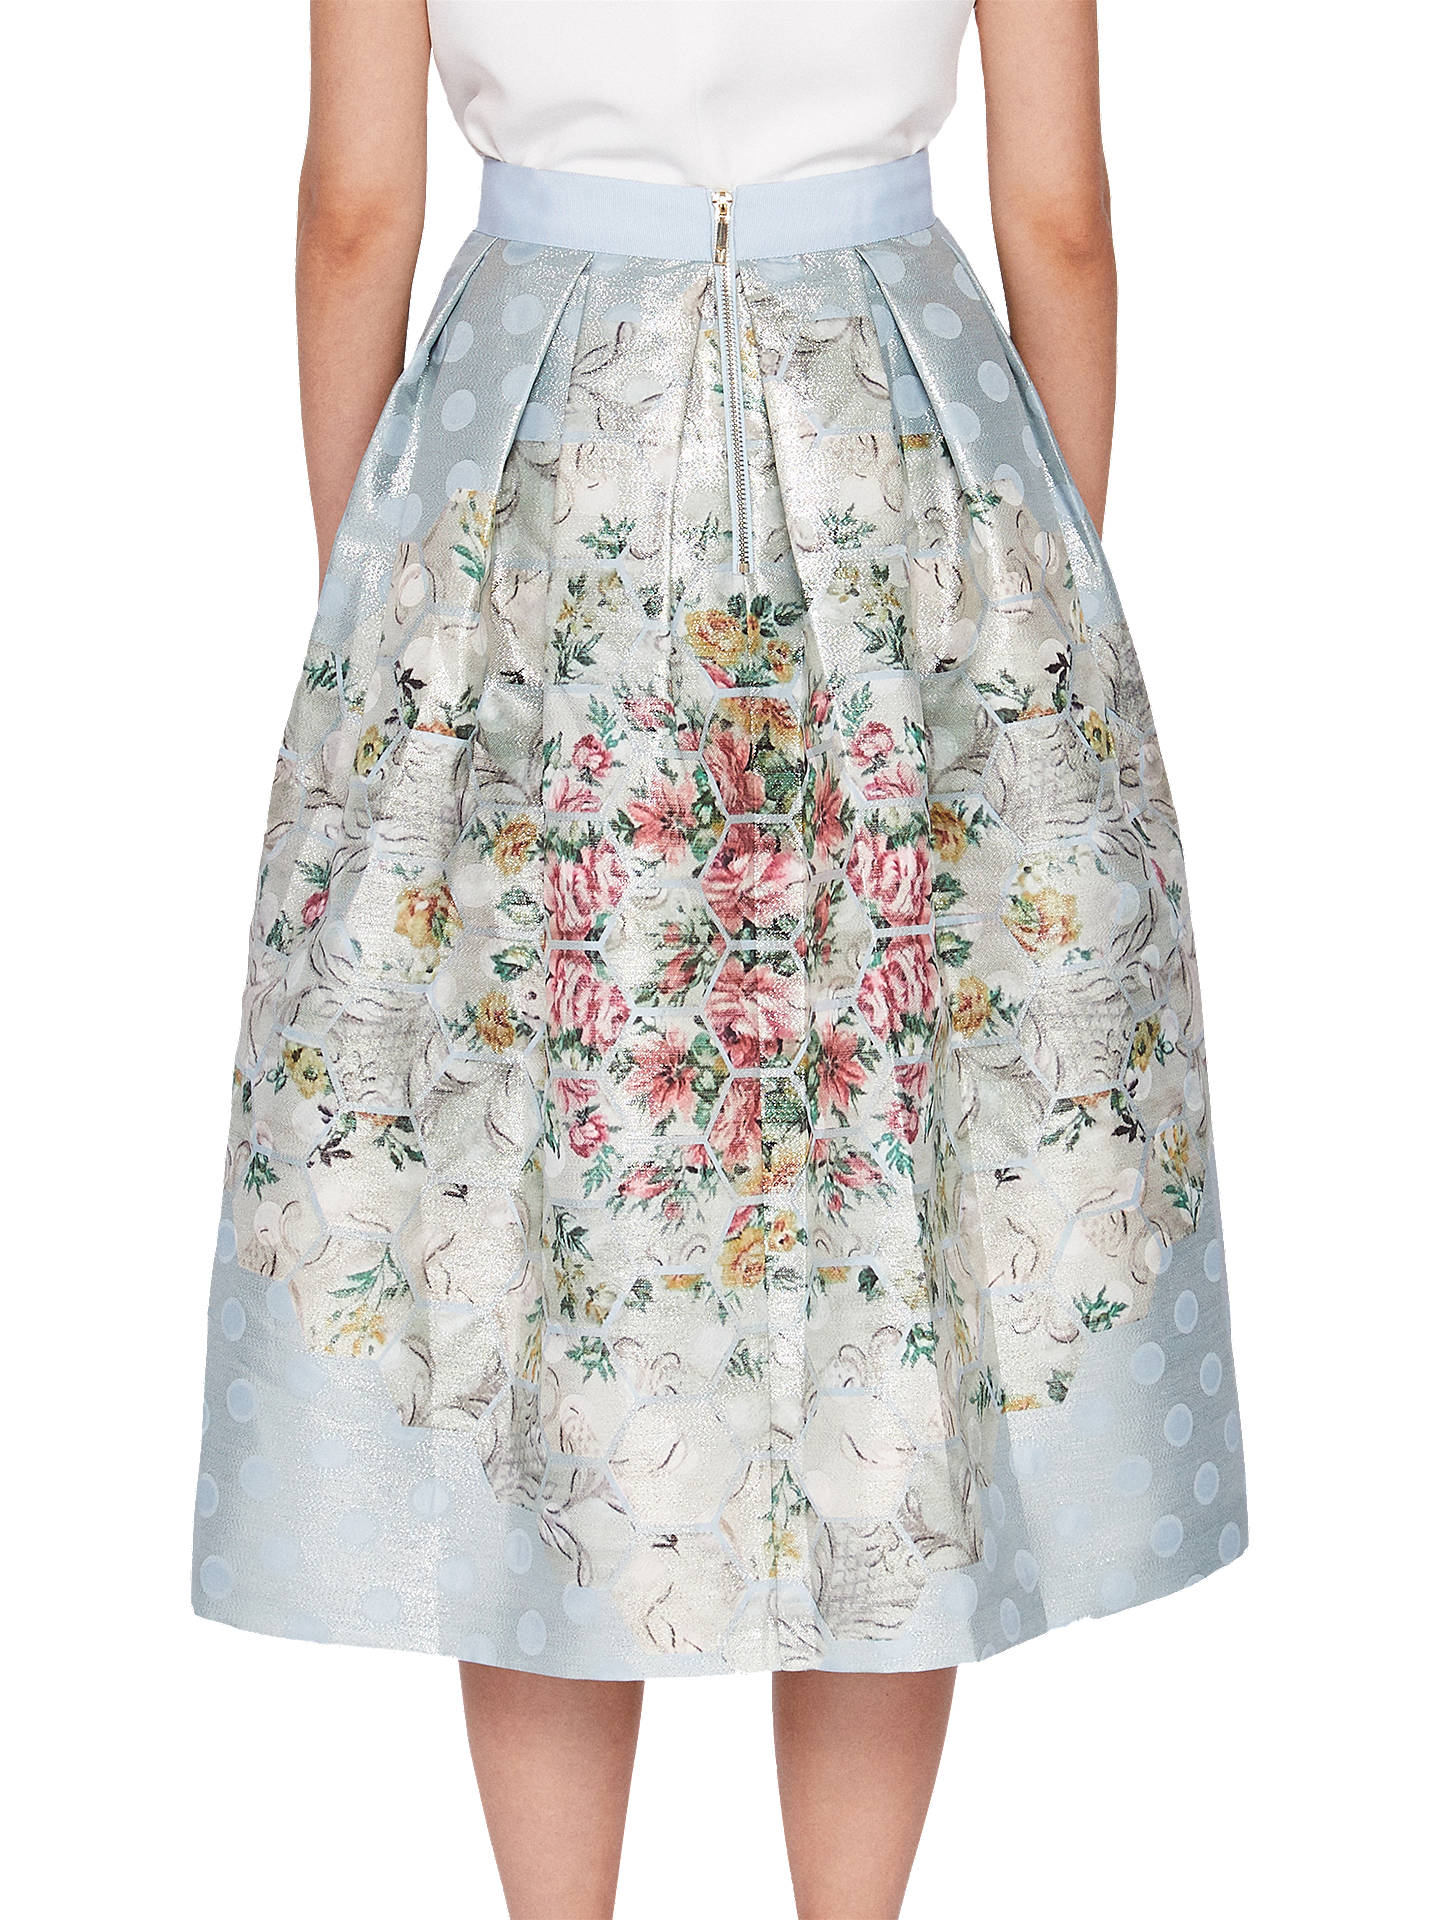 Ted Baker Kikey Patchwork Pleat Skirt, Pale Blue at John Lewis & Partners